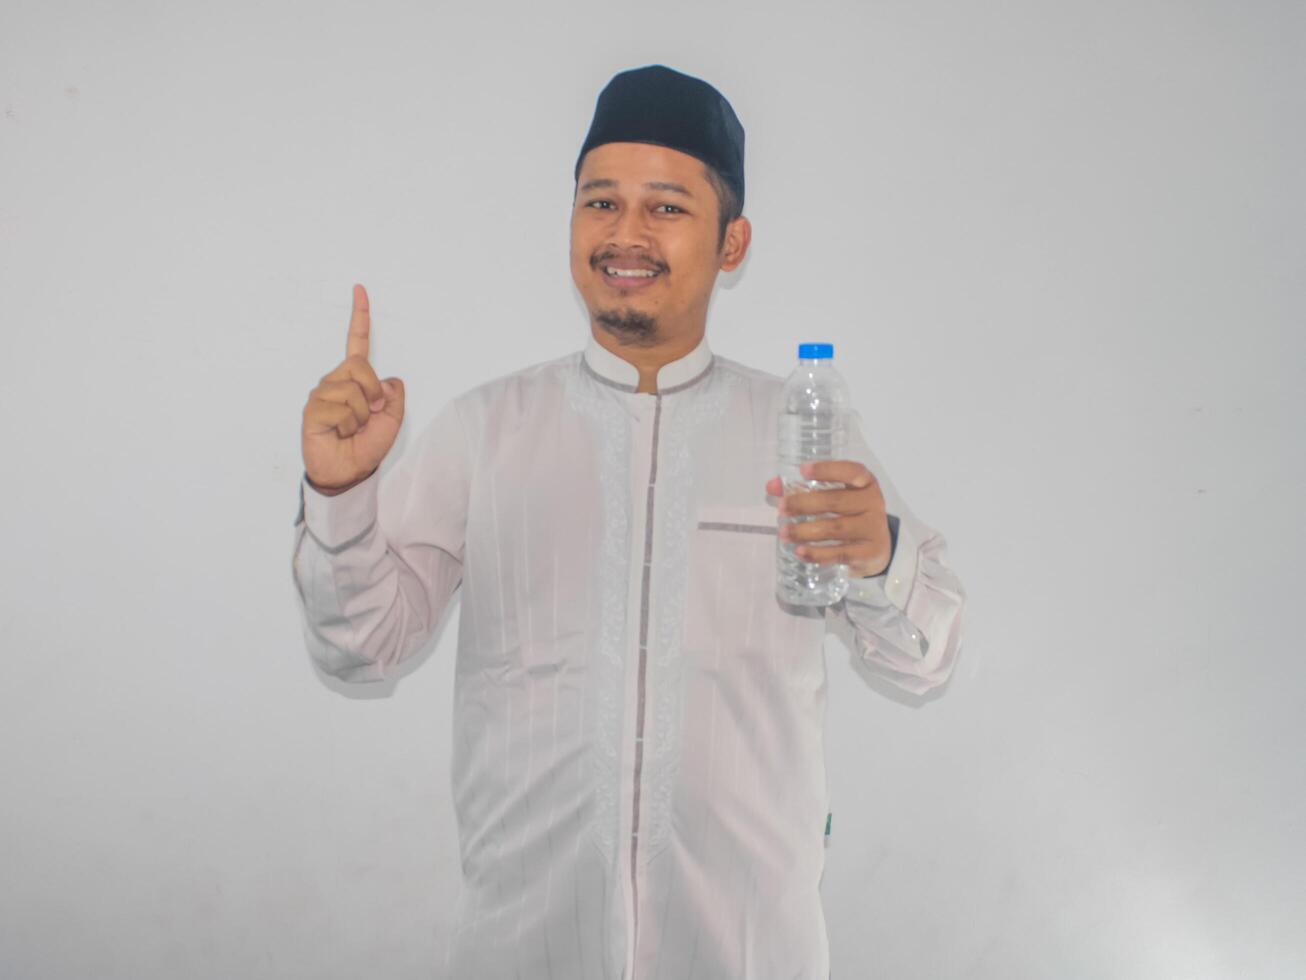 Moslem Asian man smiling and pointing finger up while holding a bottle of drinking water photo